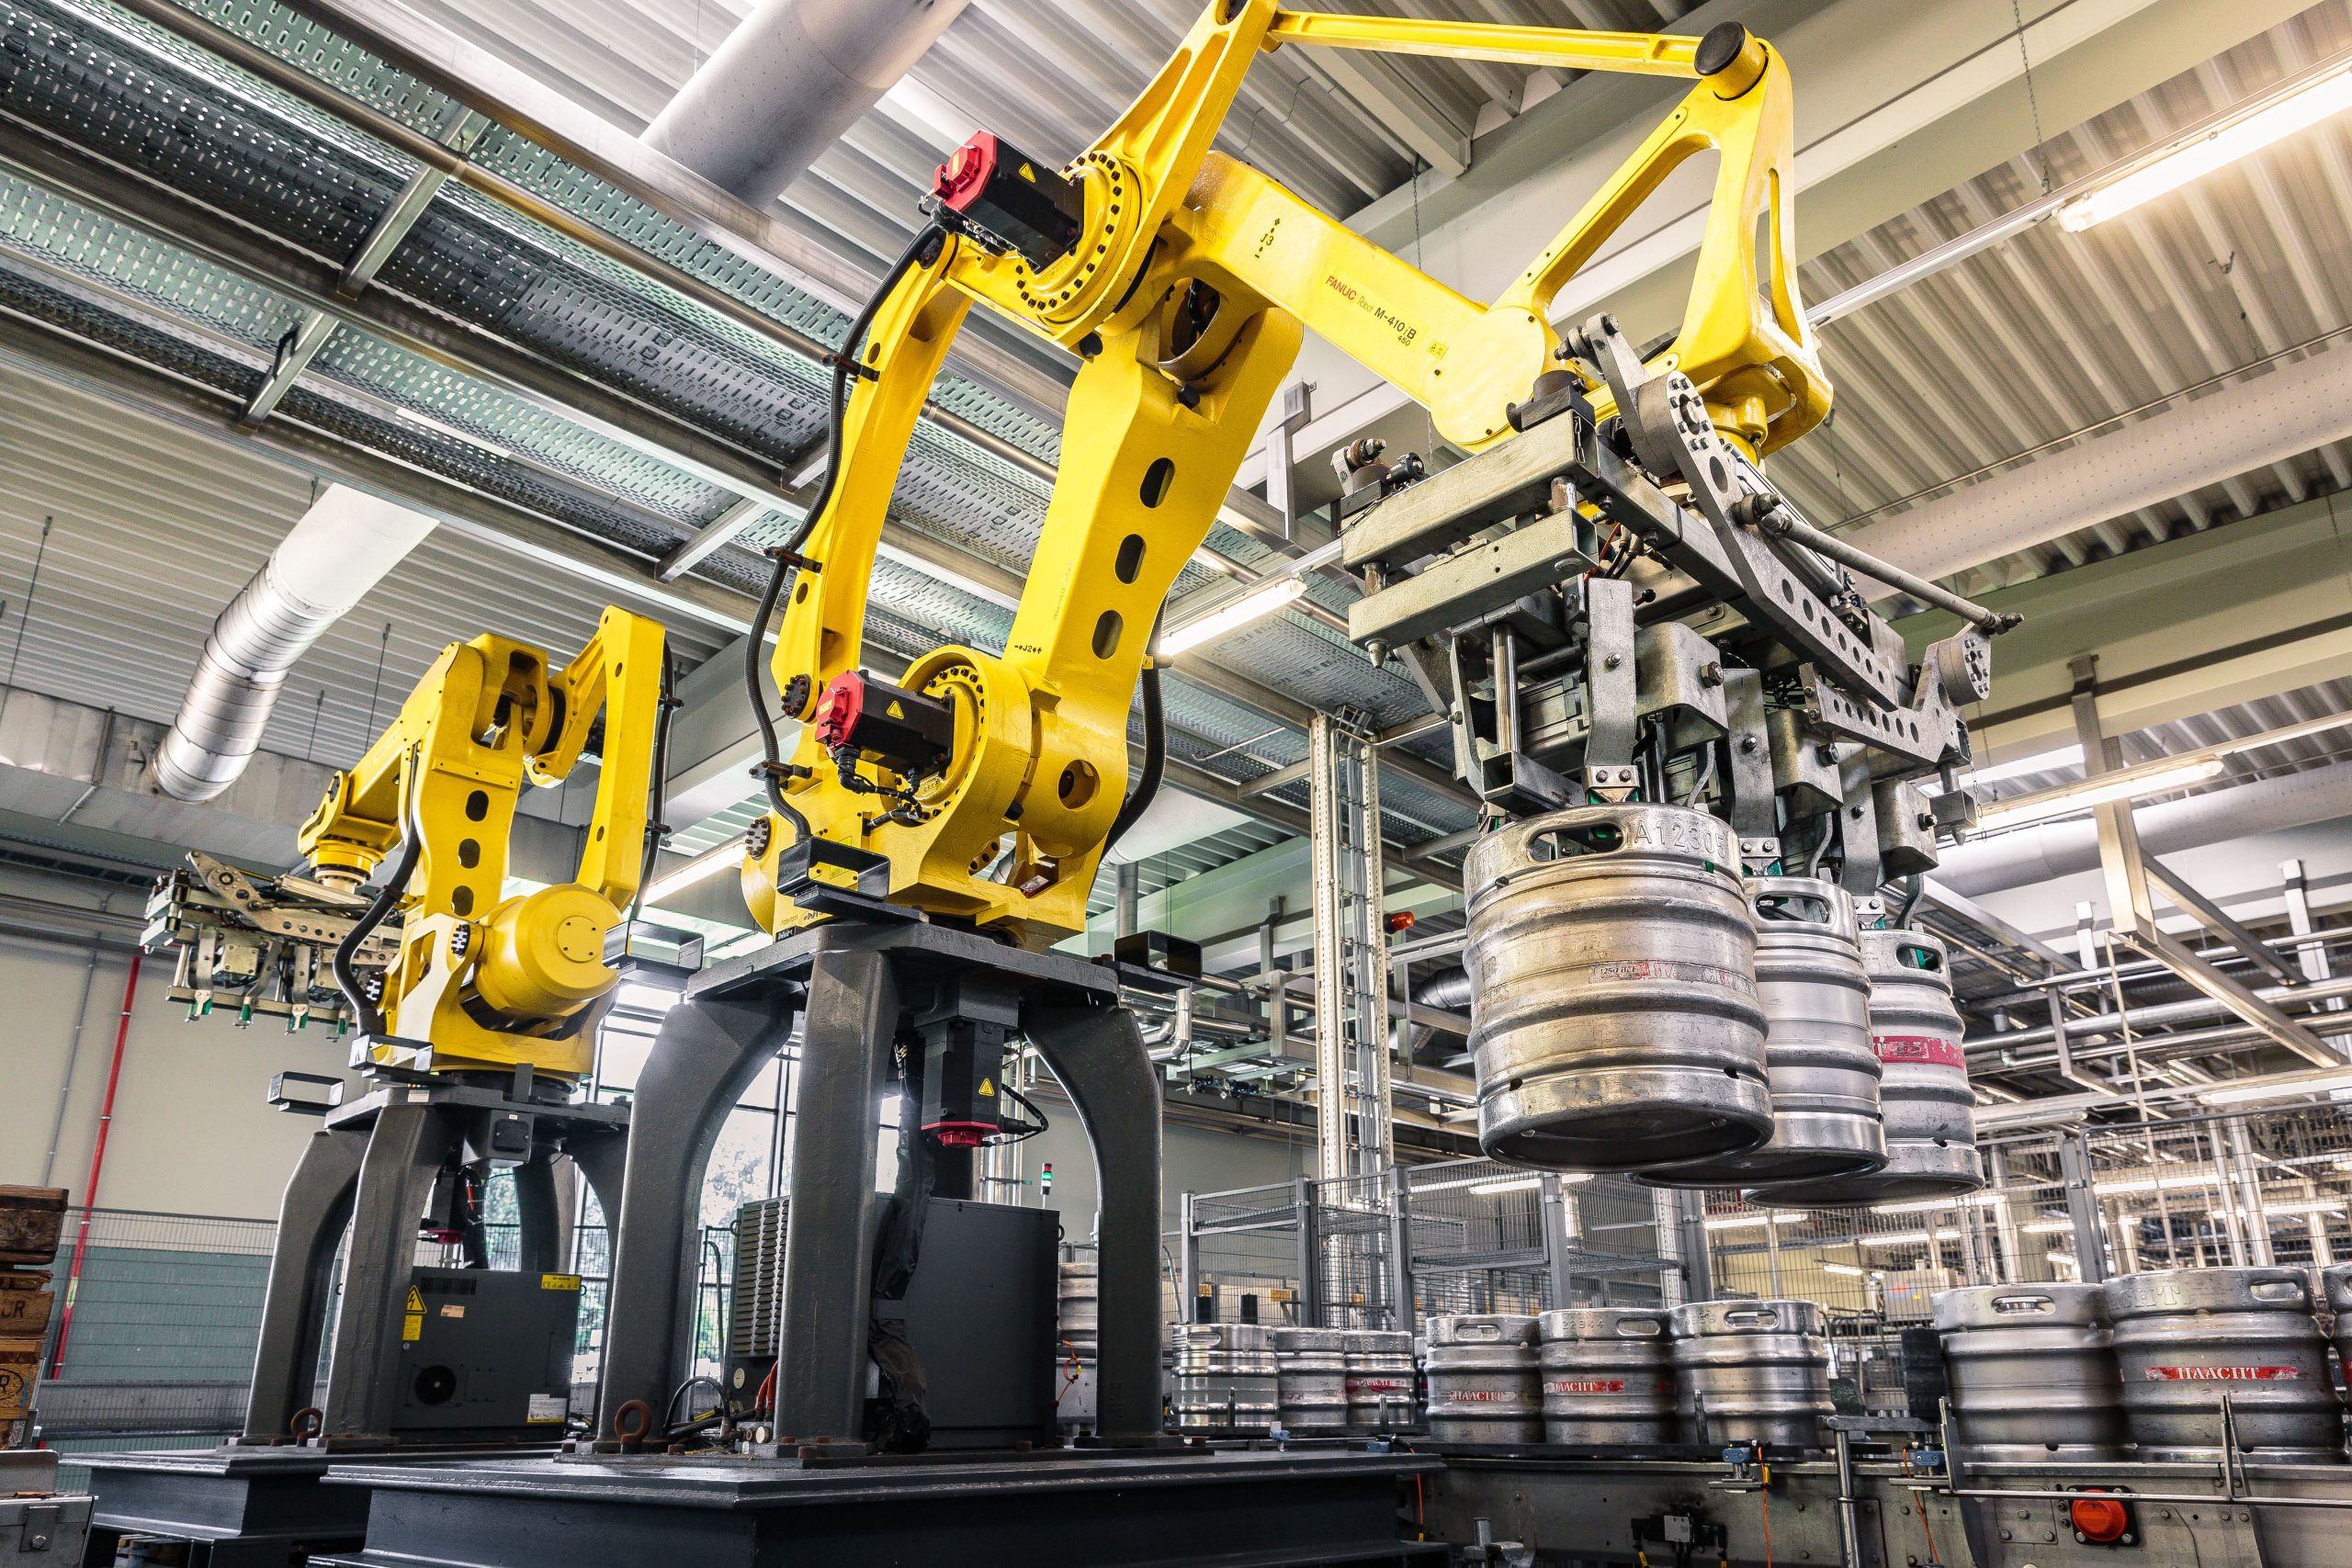 Automation inspiration: Can UK manufacturing raise robotics uptake by learning from Europe?